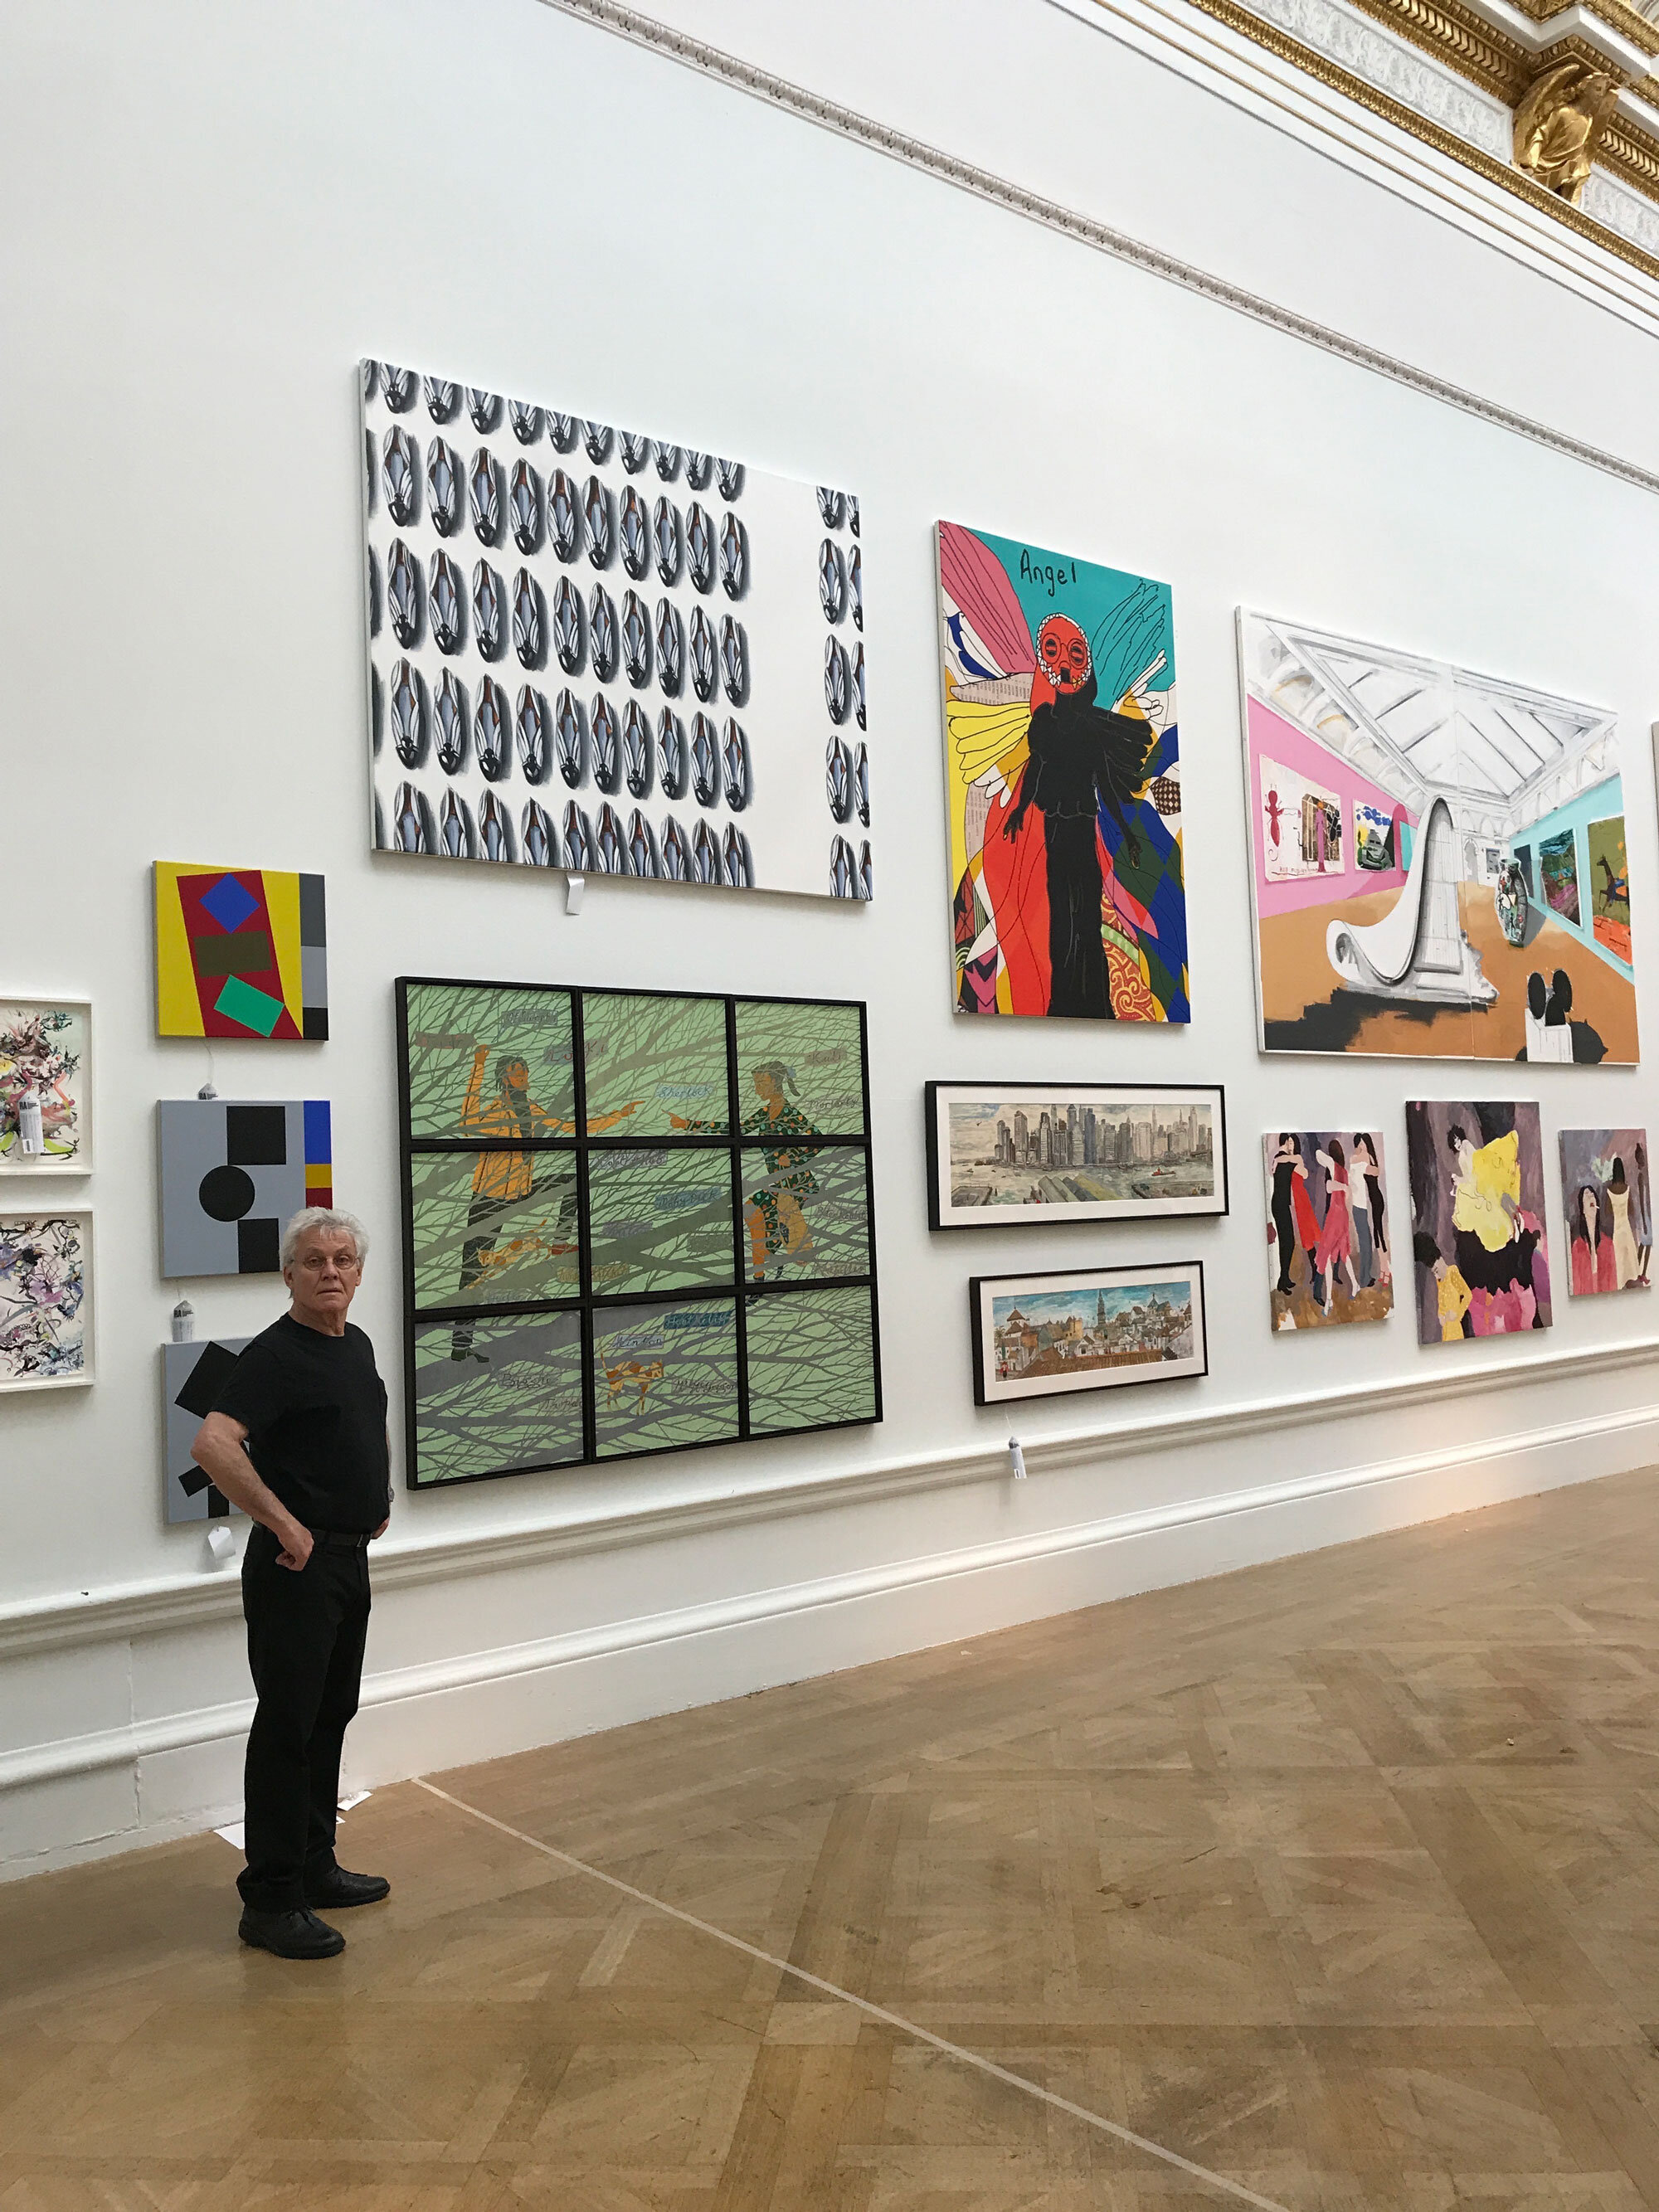  Hanging the Royal Academy Summer Show, 2017 